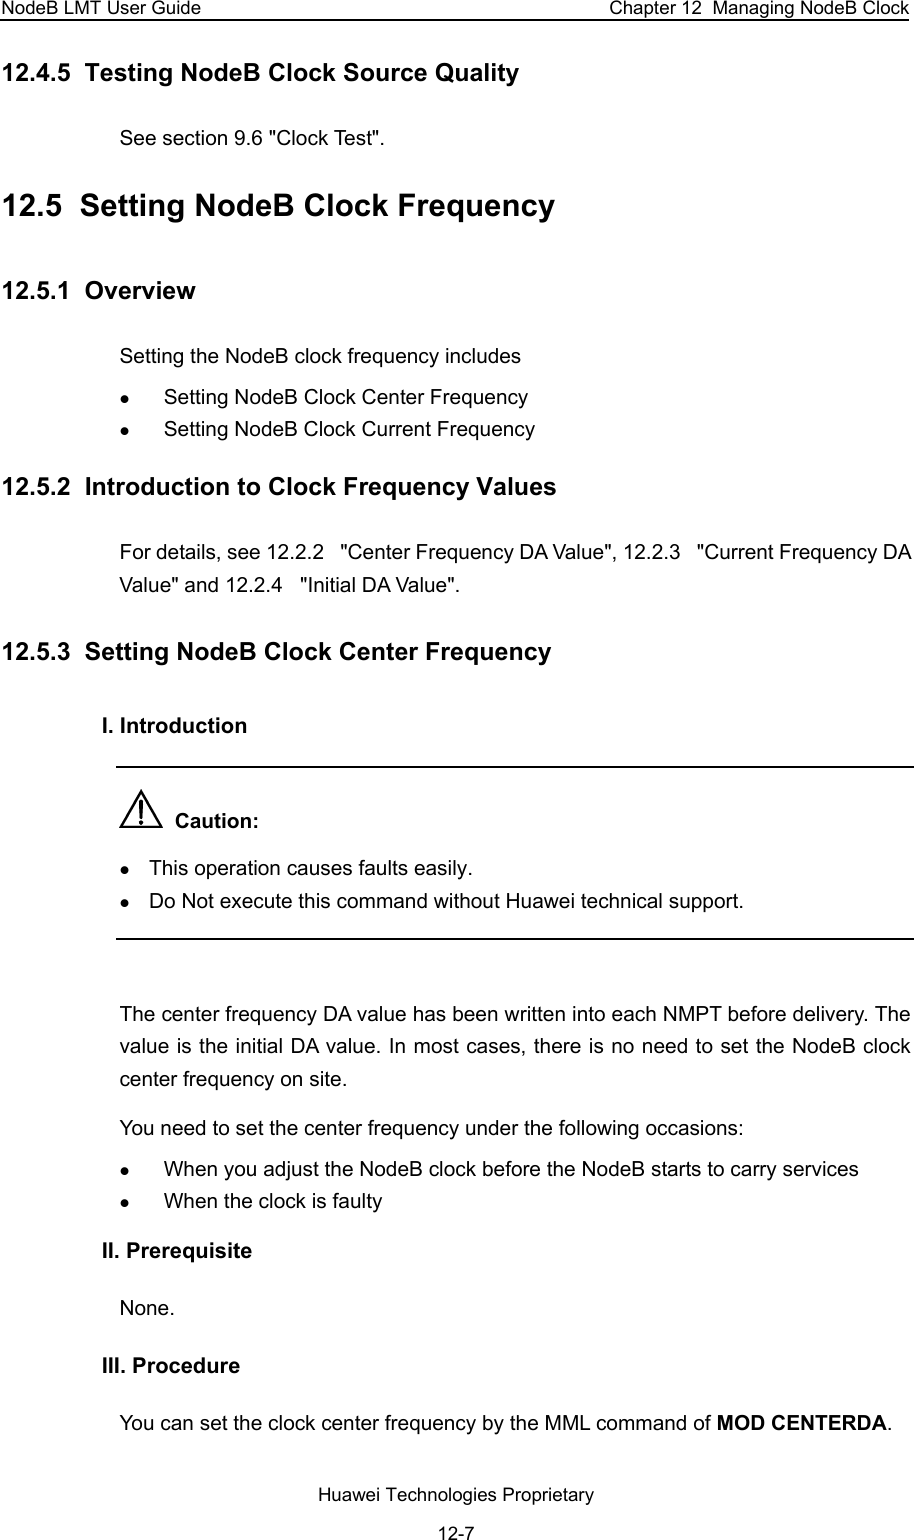 NodeB LMT User Guide  Chapter 12  Managing NodeB Clock 12.4.5  Testing NodeB Clock Source Quality See section 9.6 &quot;Clock Test&quot;.  12.5  Setting NodeB Clock Frequency  12.5.1  Overview Setting the NodeB clock frequency includes z Setting NodeB Clock Center Frequency  z Setting NodeB Clock Current Frequency  12.5.2  Introduction to Clock Frequency Values For details, see 12.2.2   &quot;Center Frequency DA Value&quot;, 12.2.3   &quot;Current Frequency DA Value&quot; and 12.2.4   &quot;Initial DA Value&quot;.  12.5.3  Setting NodeB Clock Center Frequency  I. Introduction   Caution:  z This operation causes faults easily.  z Do Not execute this command without Huawei technical support.  The center frequency DA value has been written into each NMPT before delivery. The value is the initial DA value. In most cases, there is no need to set the NodeB clock center frequency on site.  You need to set the center frequency under the following occasions:  z When you adjust the NodeB clock before the NodeB starts to carry services z When the clock is faulty II. Prerequisite None.  III. Procedure You can set the clock center frequency by the MML command of MOD CENTERDA. Huawei Technologies Proprietary 12-7 